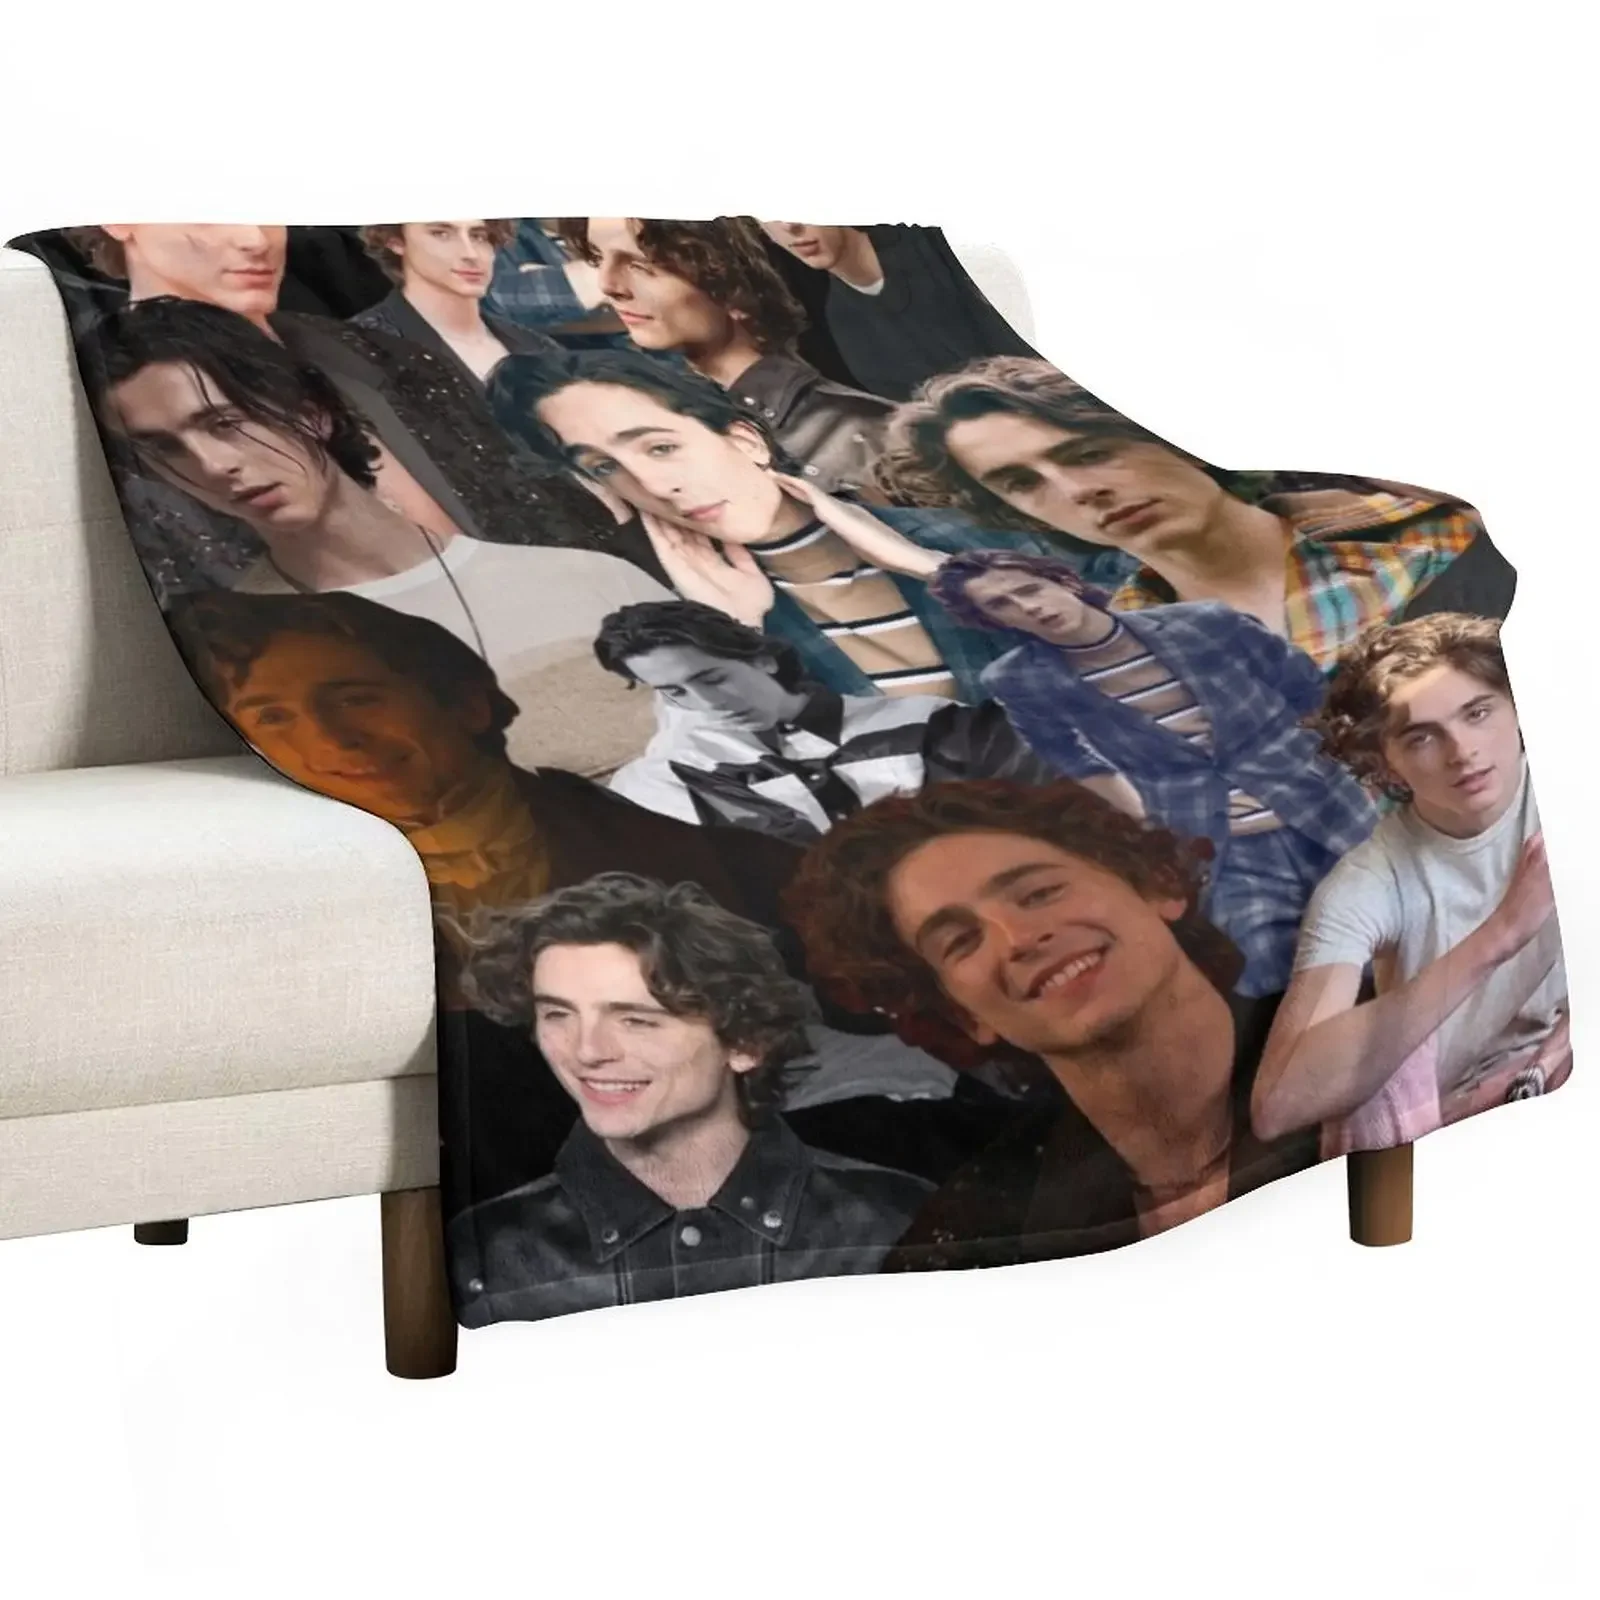 

Timothee Chalamet photo collage Throw Blanket Warm Summer Beddings blankets ands valentine gift ideas Blankets